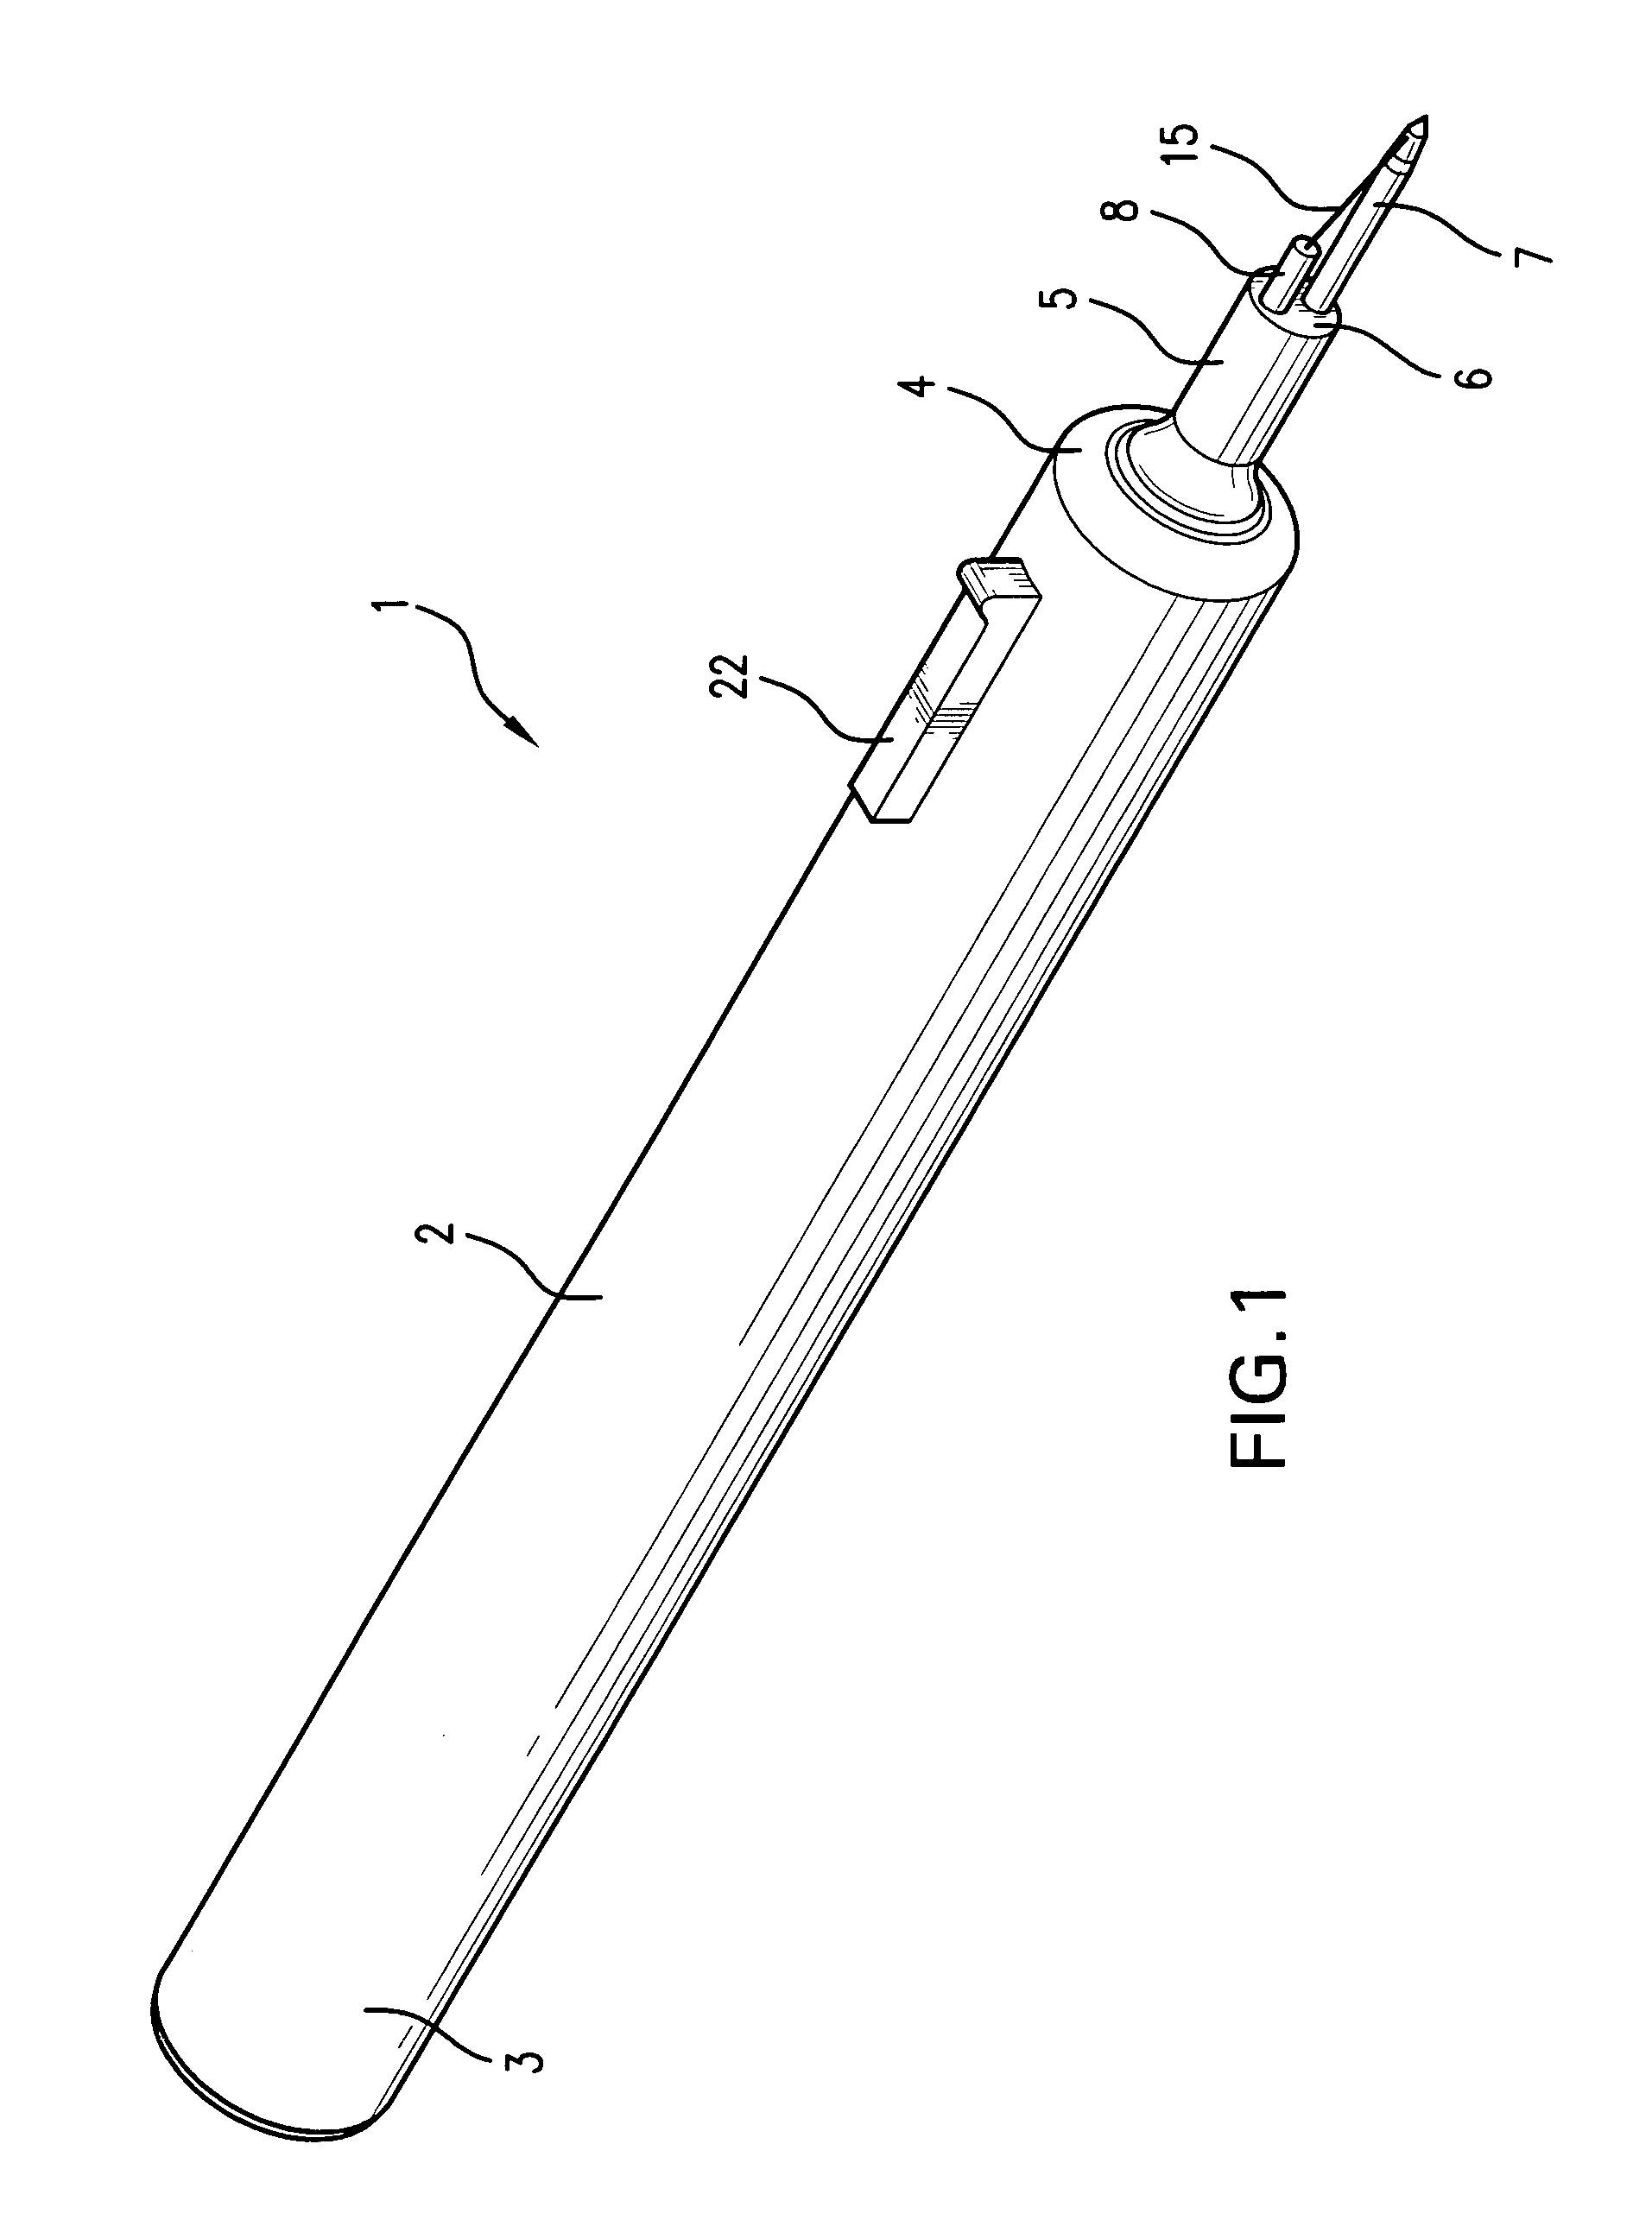 Method and instrument for thermal suture cutting